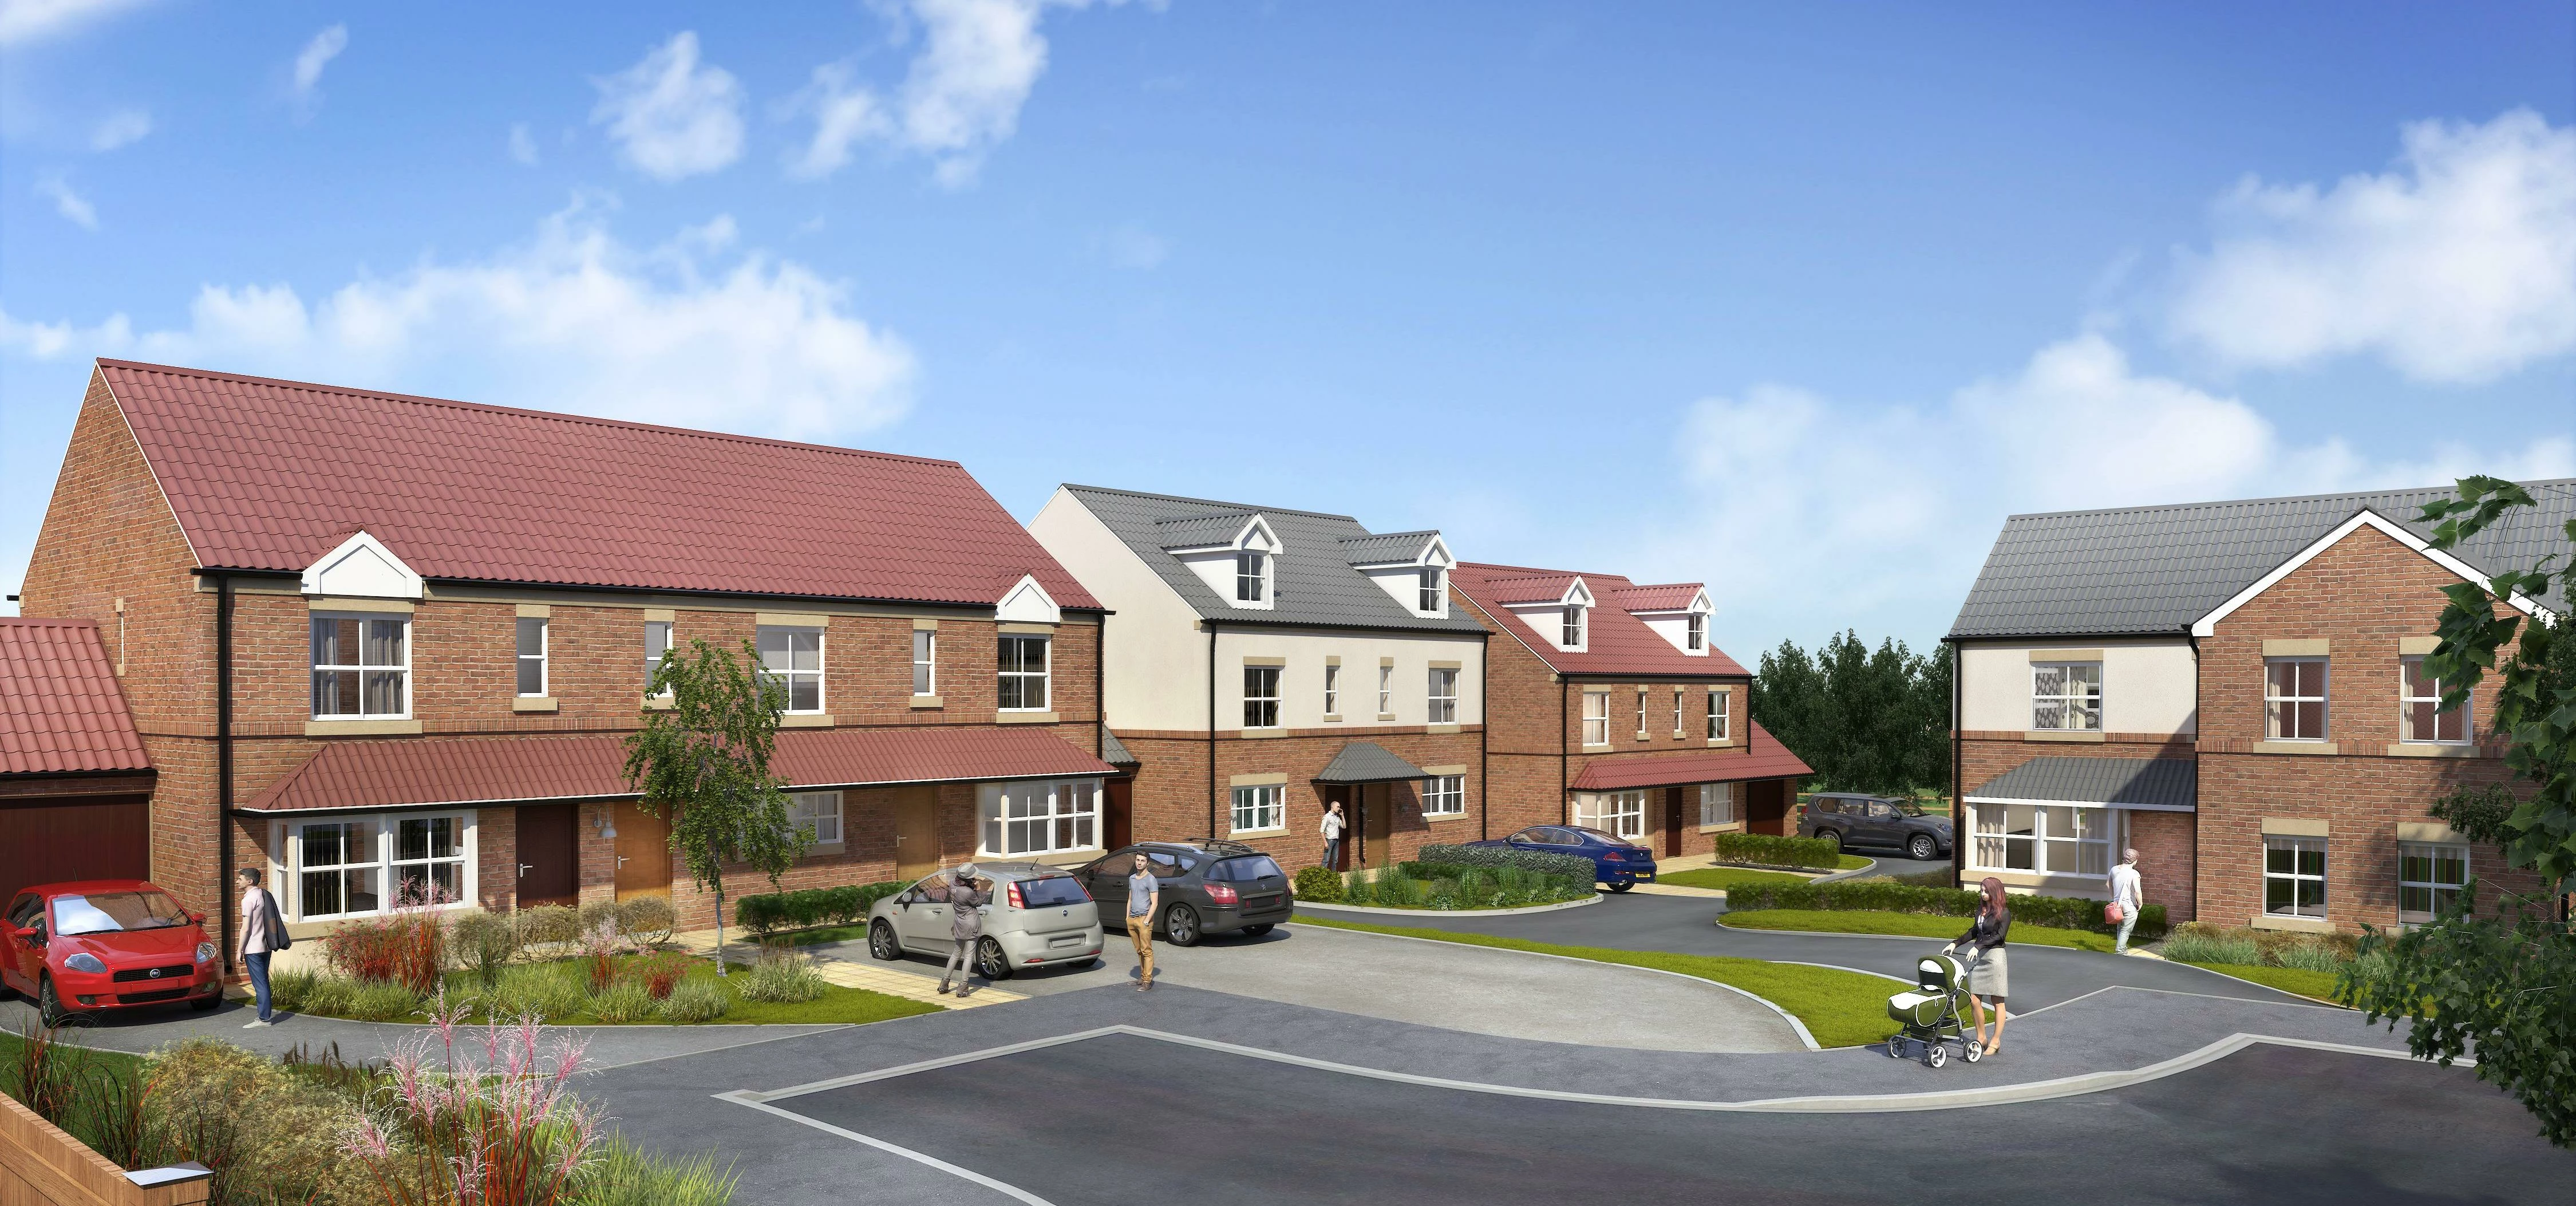 Race to register interest at Ripon's new homes development 